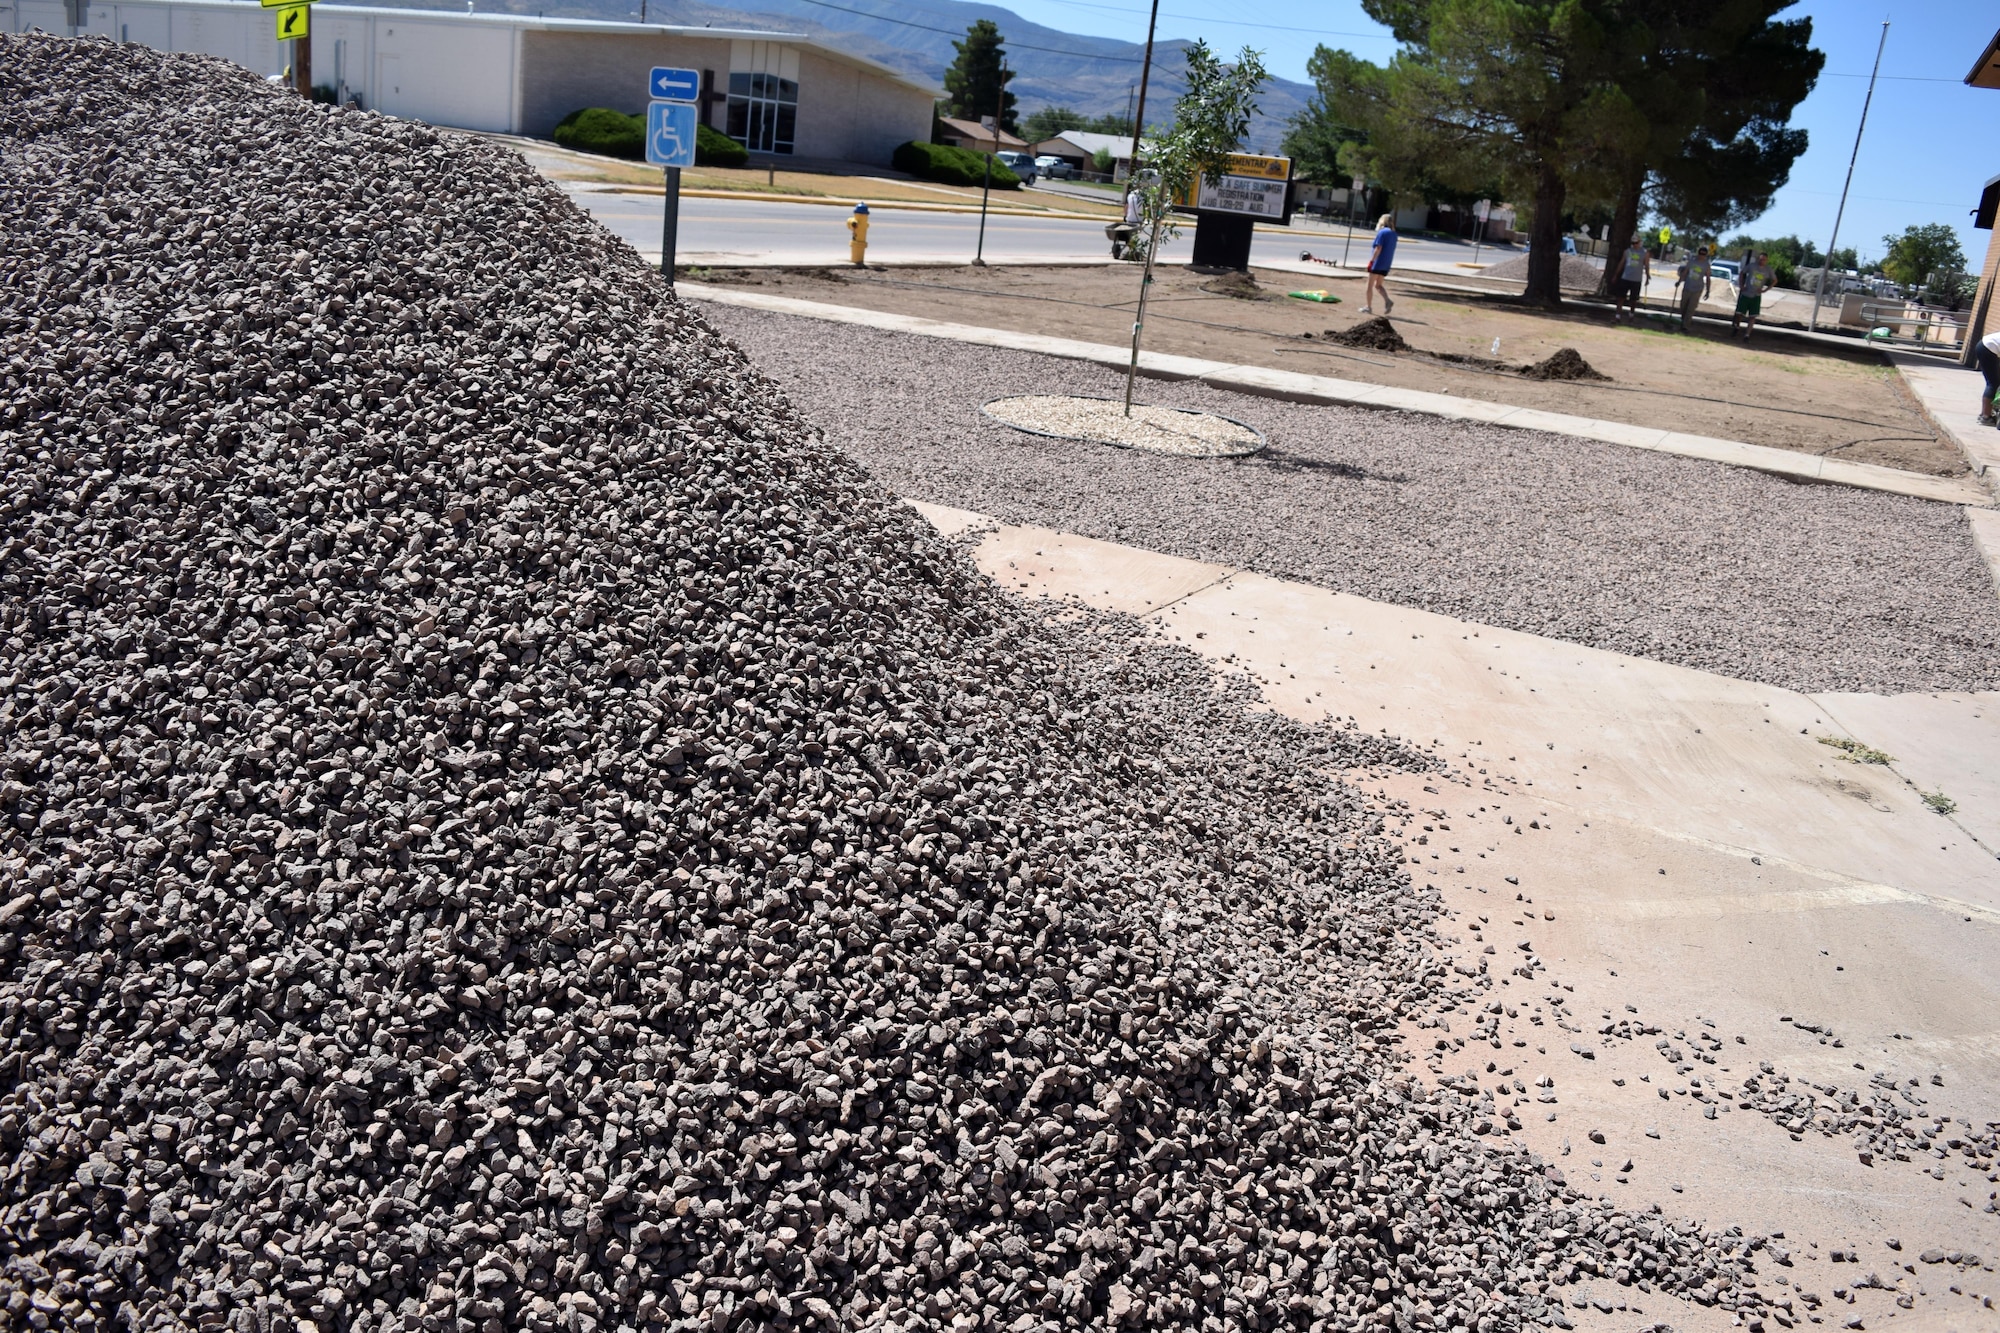 A pile of rock rests near the entrance to Sierra Elementary School in Alamogordo, N.M., on July 23, 2016. More than 77 tons of rock was laid to landscape the entrance area. (U.S. Air Force photo by Staff Sgt. Eboni Prince)